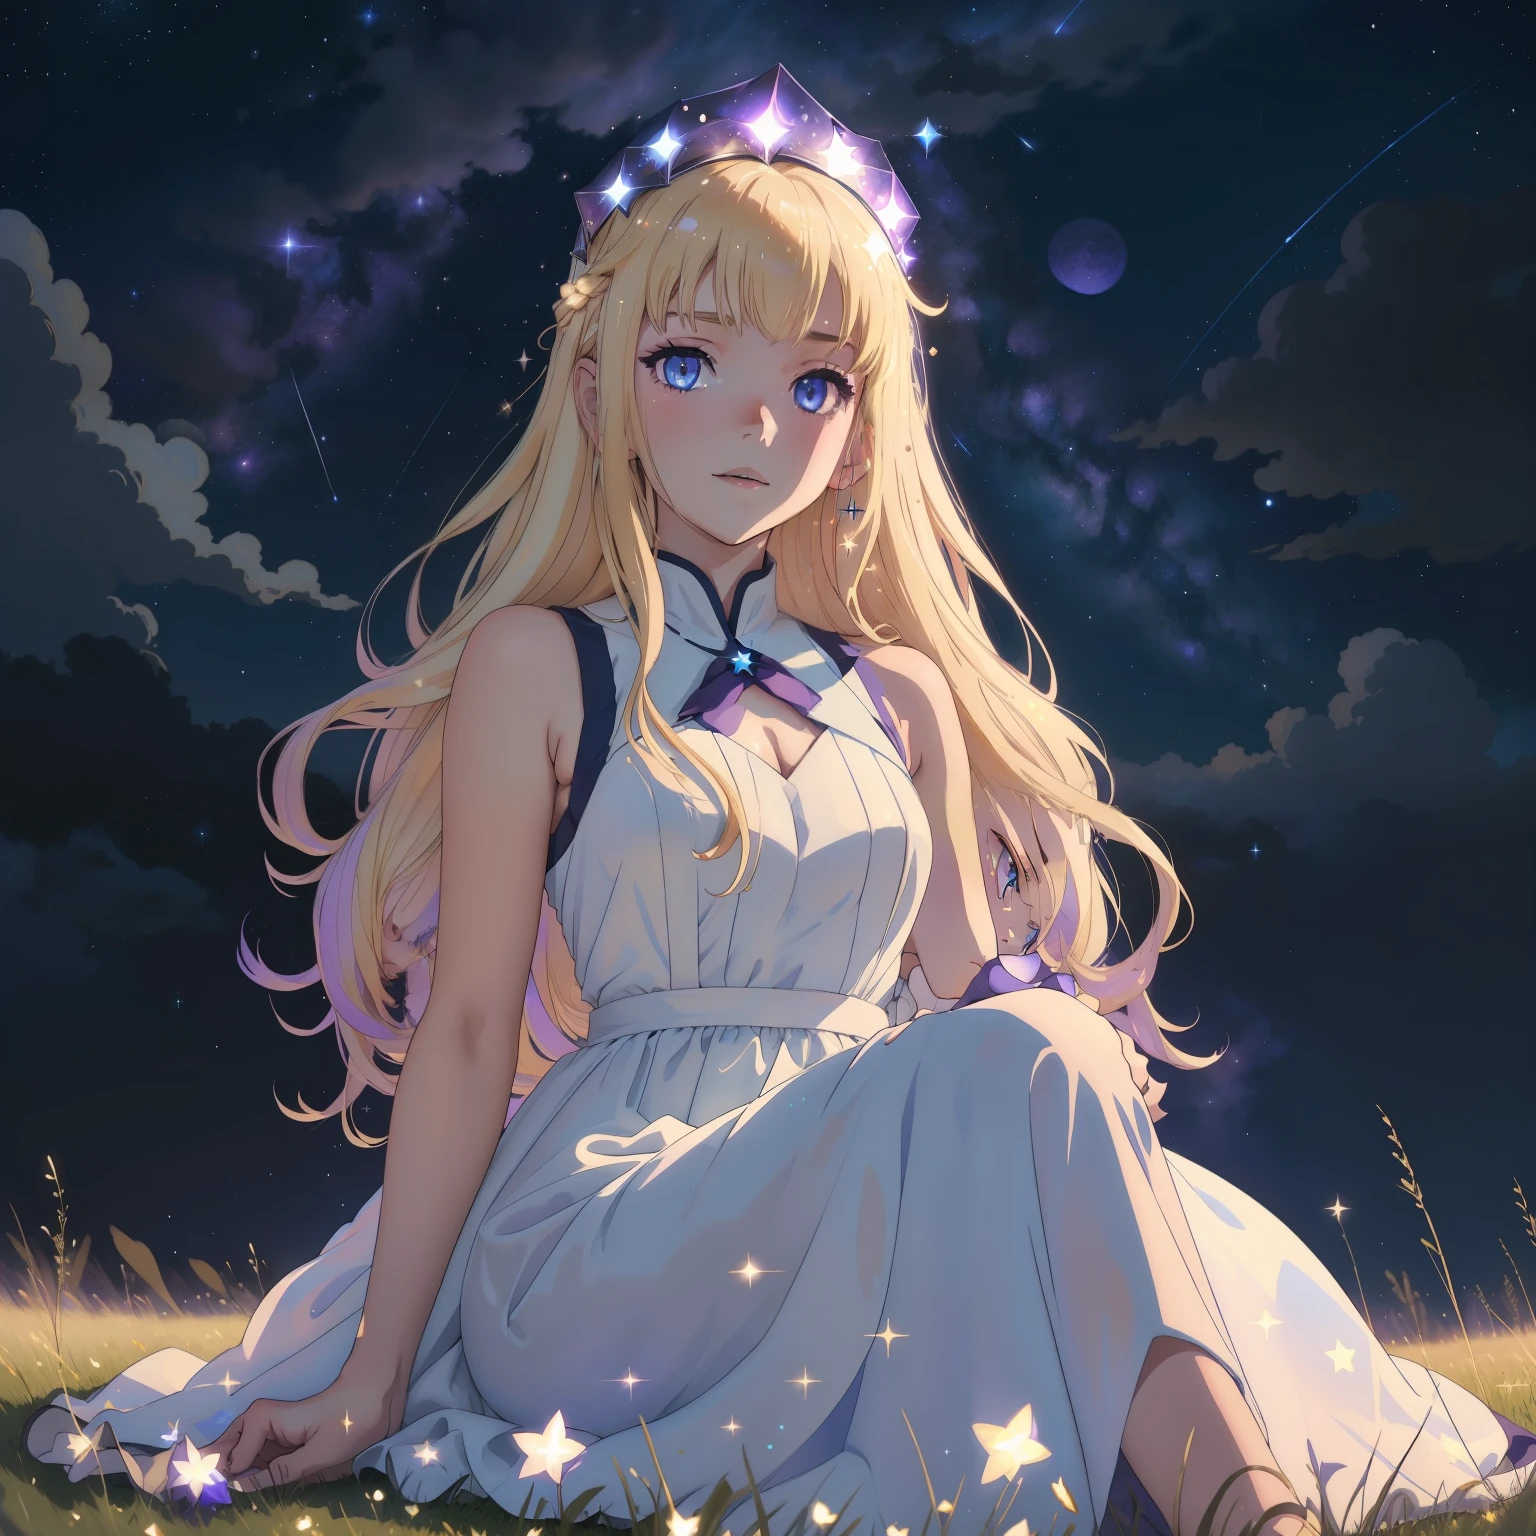 Light blonde haired anime girl with pale bluish violet colored eyes wearing a sleeveless celestial translucent long dress with glitter sitting on the dark grass under dark sinister starry sky alone by herself, shooting stars in the sky, shining numerous small stars on her hair